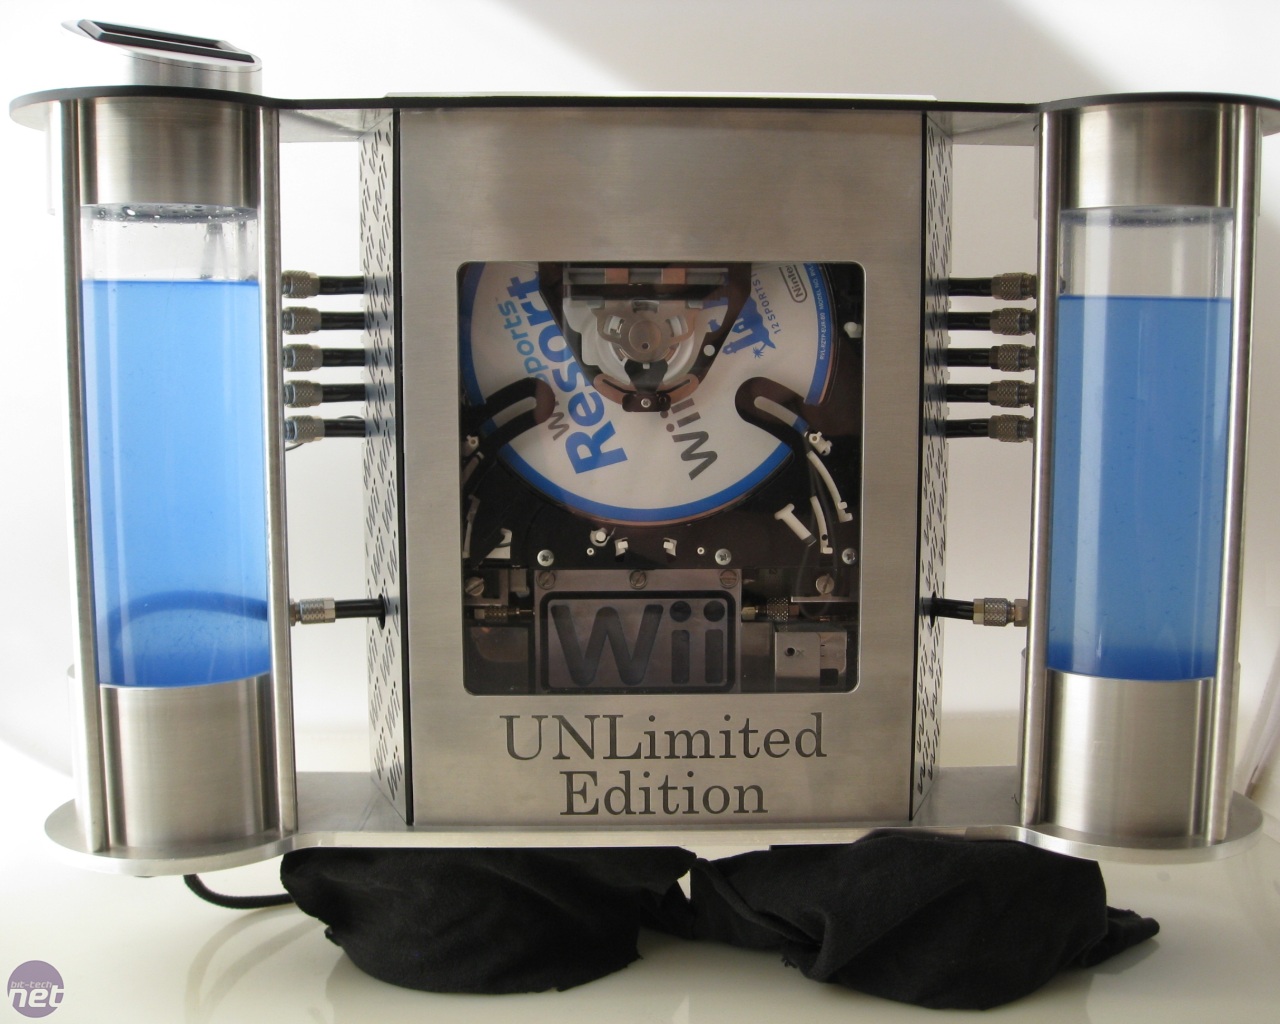 Nintendo Wii Unlimited Edition Case Mod